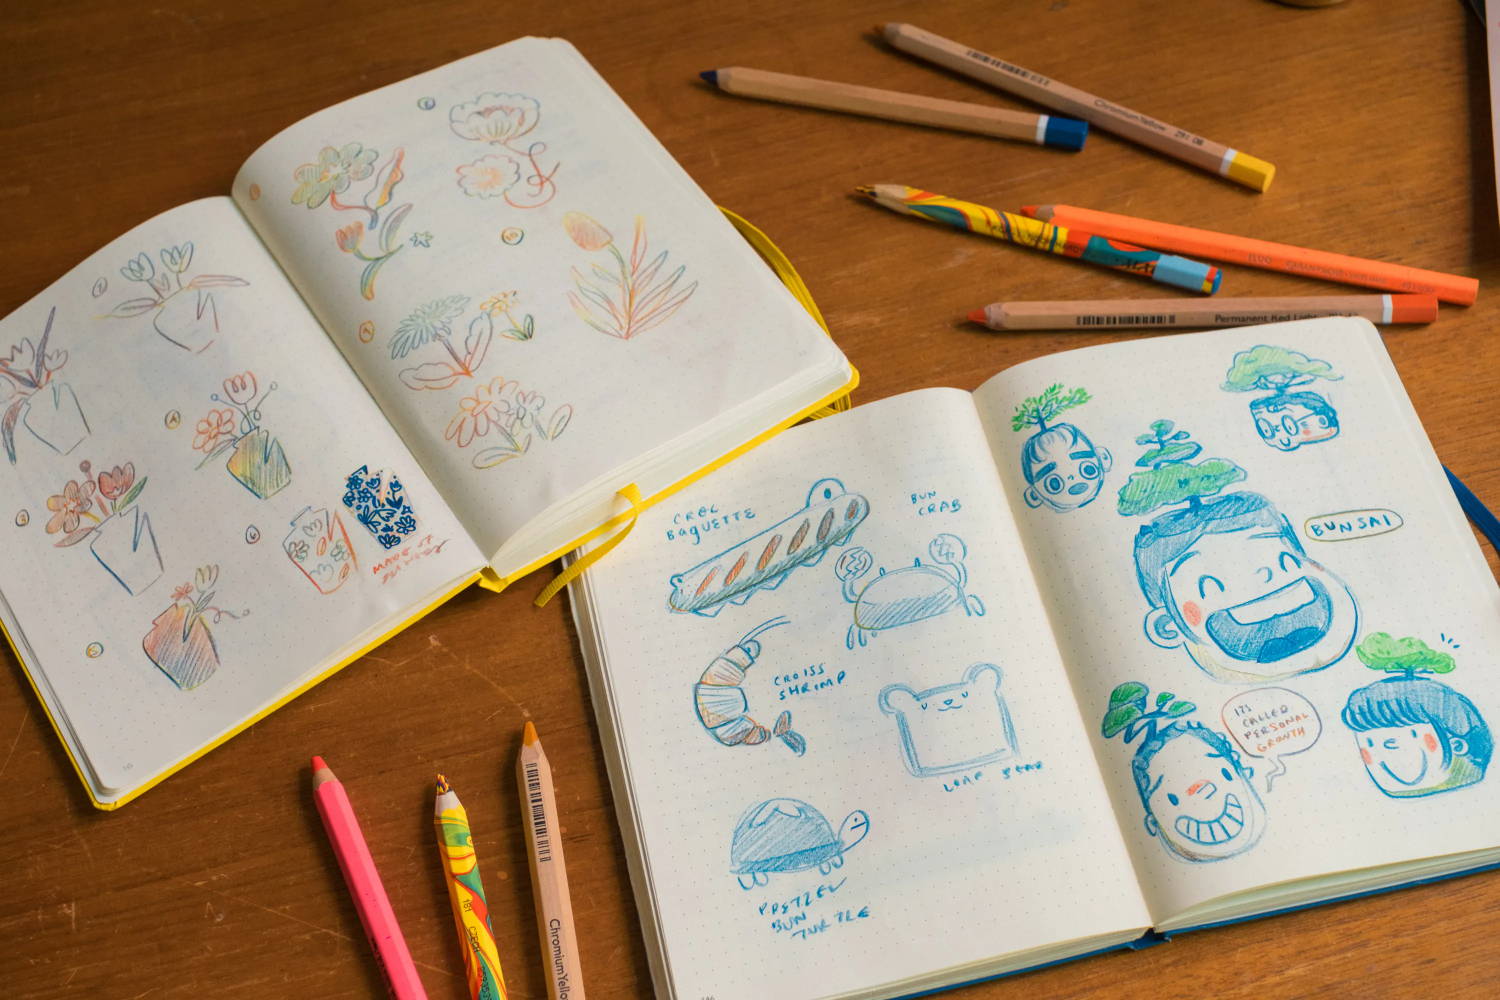 Two open sketchbook featuring colorful illustrations